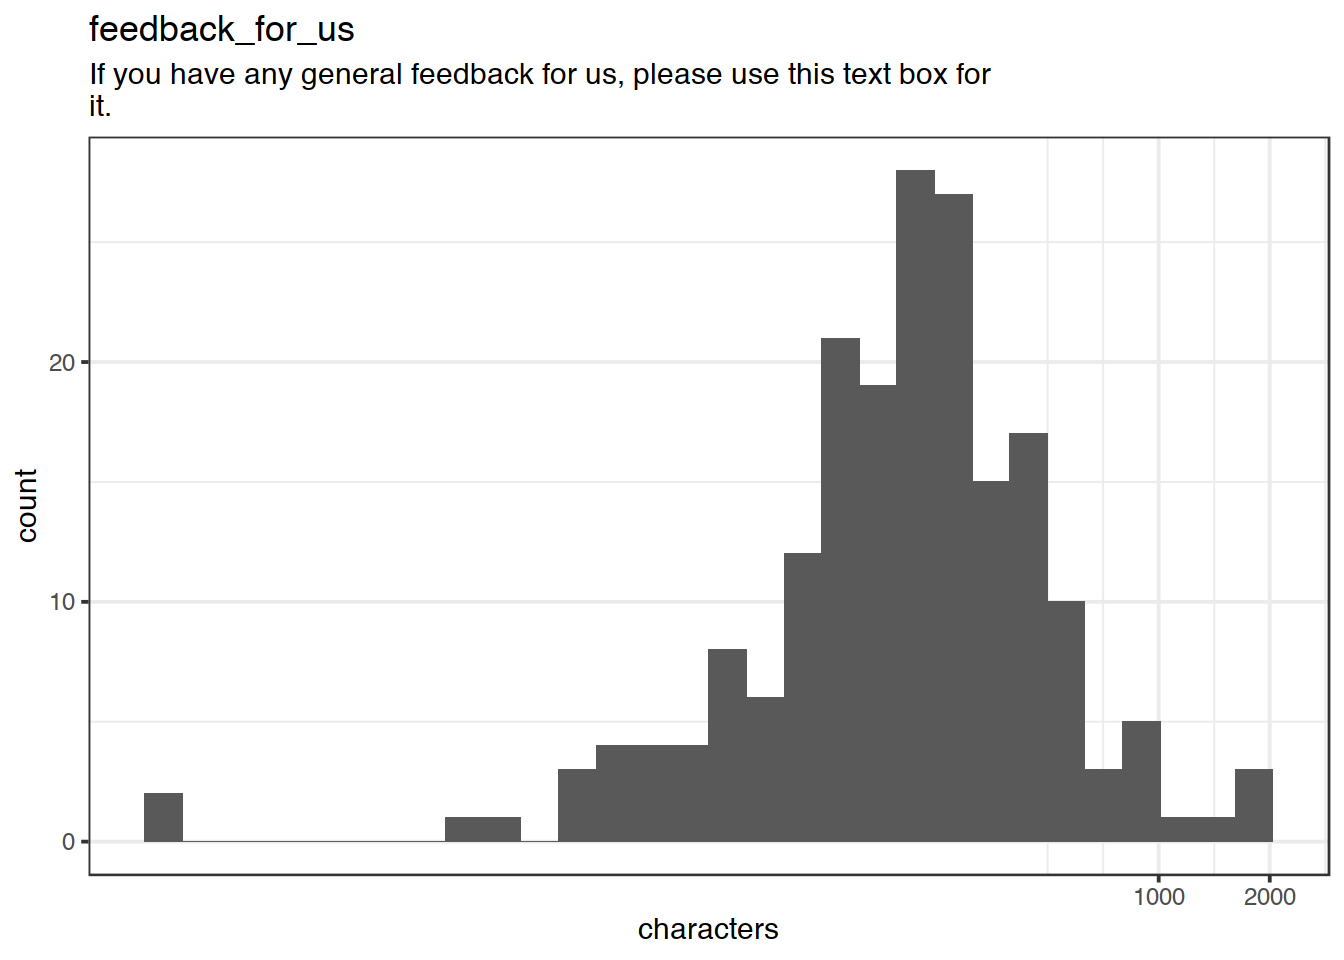 Distribution of values for feedback_for_us